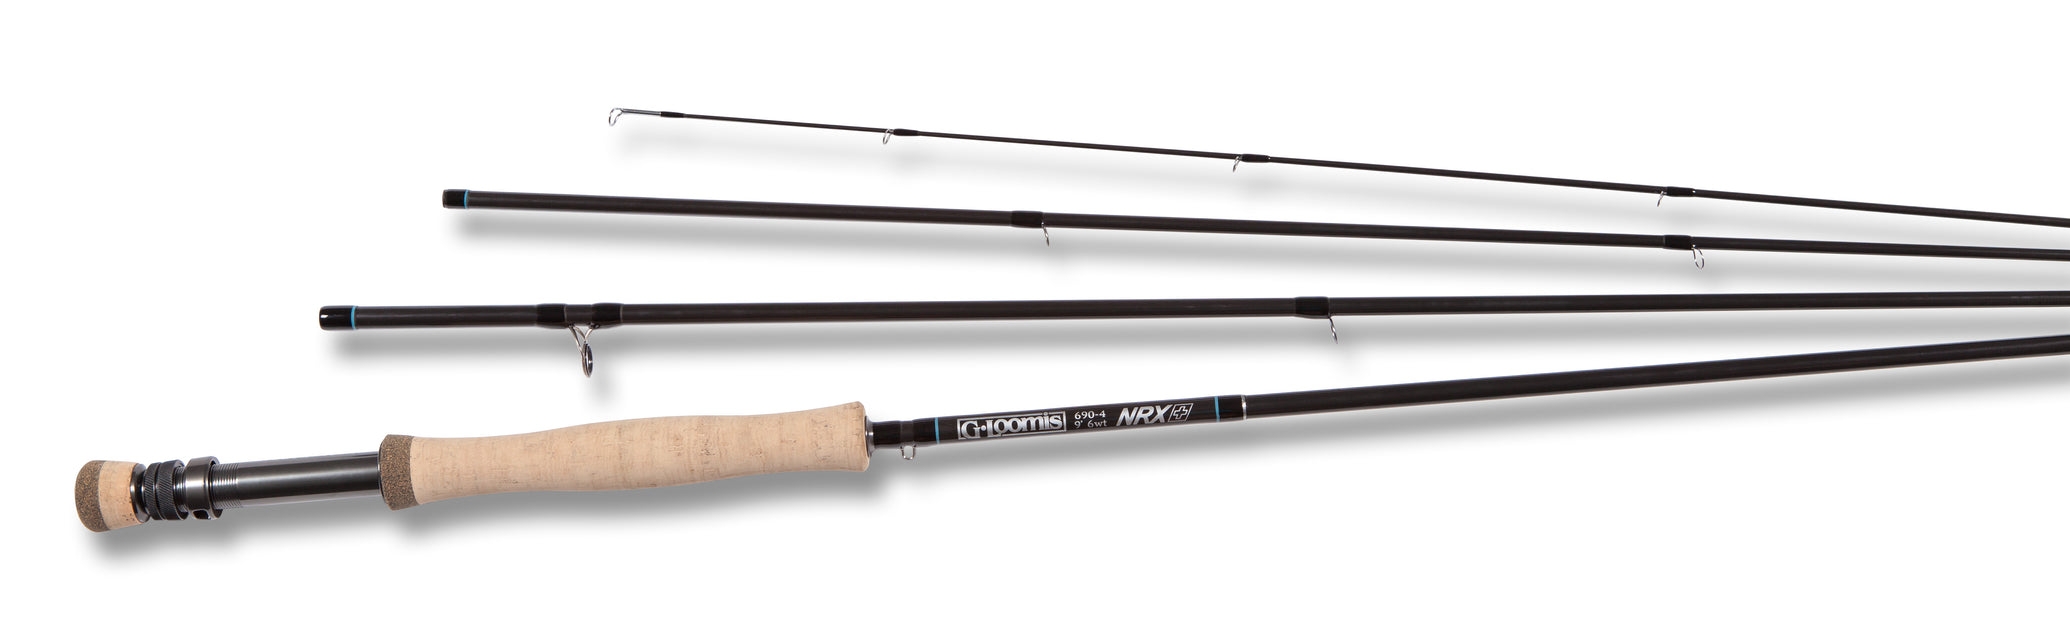 G.Loomis 2008 fly rods